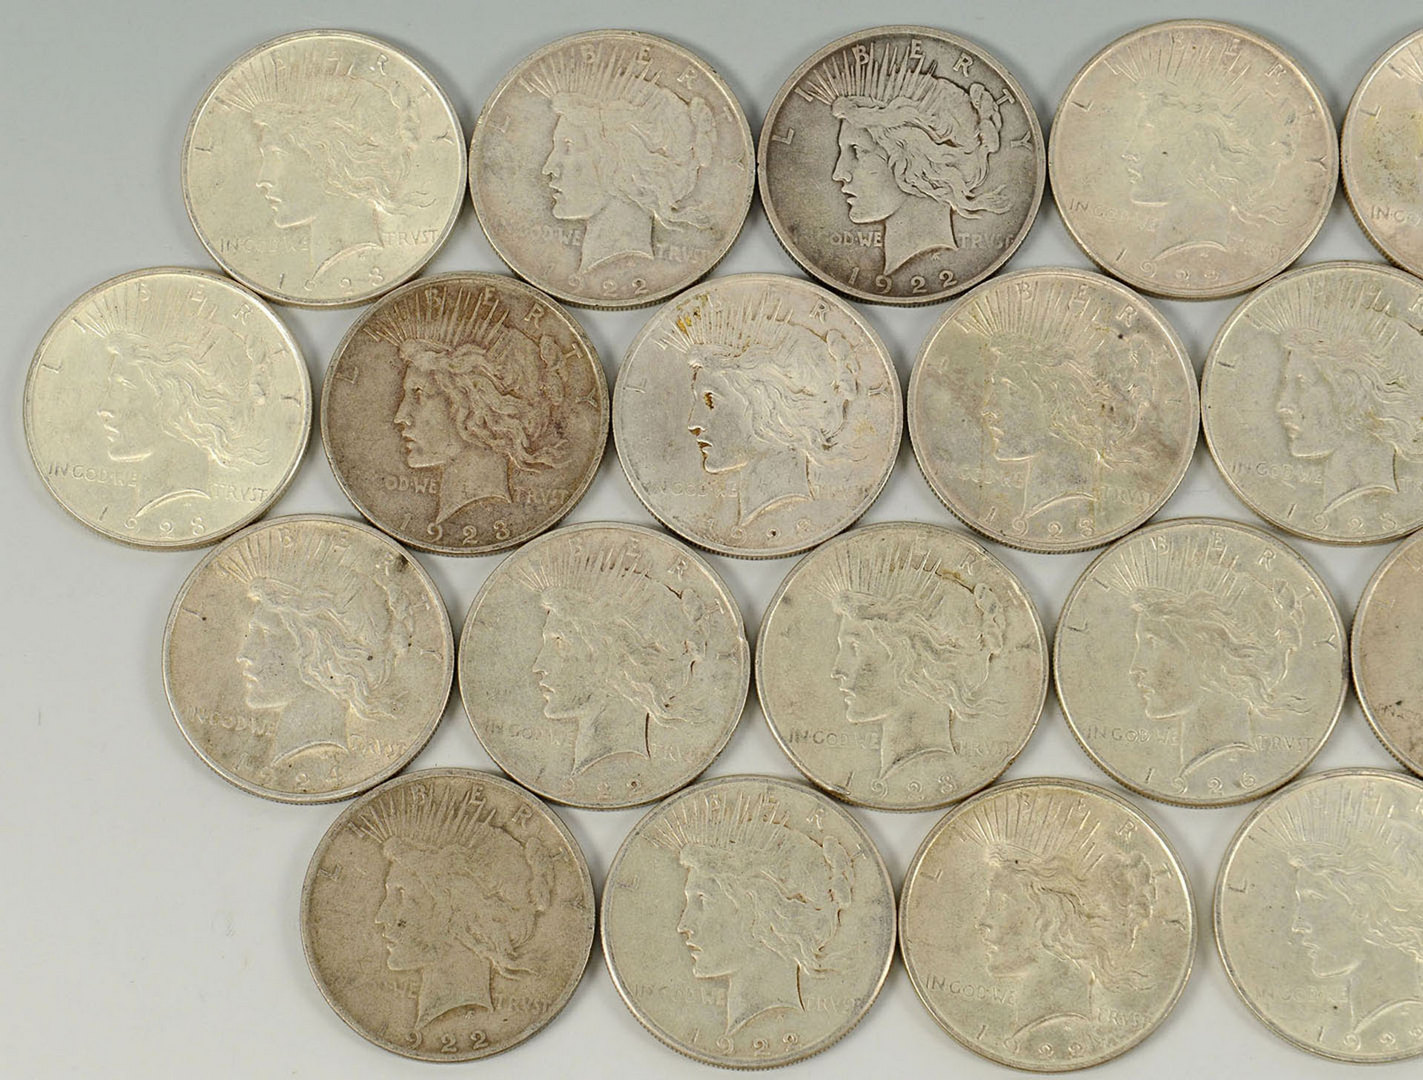 Lot 526: Grouping of 28 Peace Silver Dollars